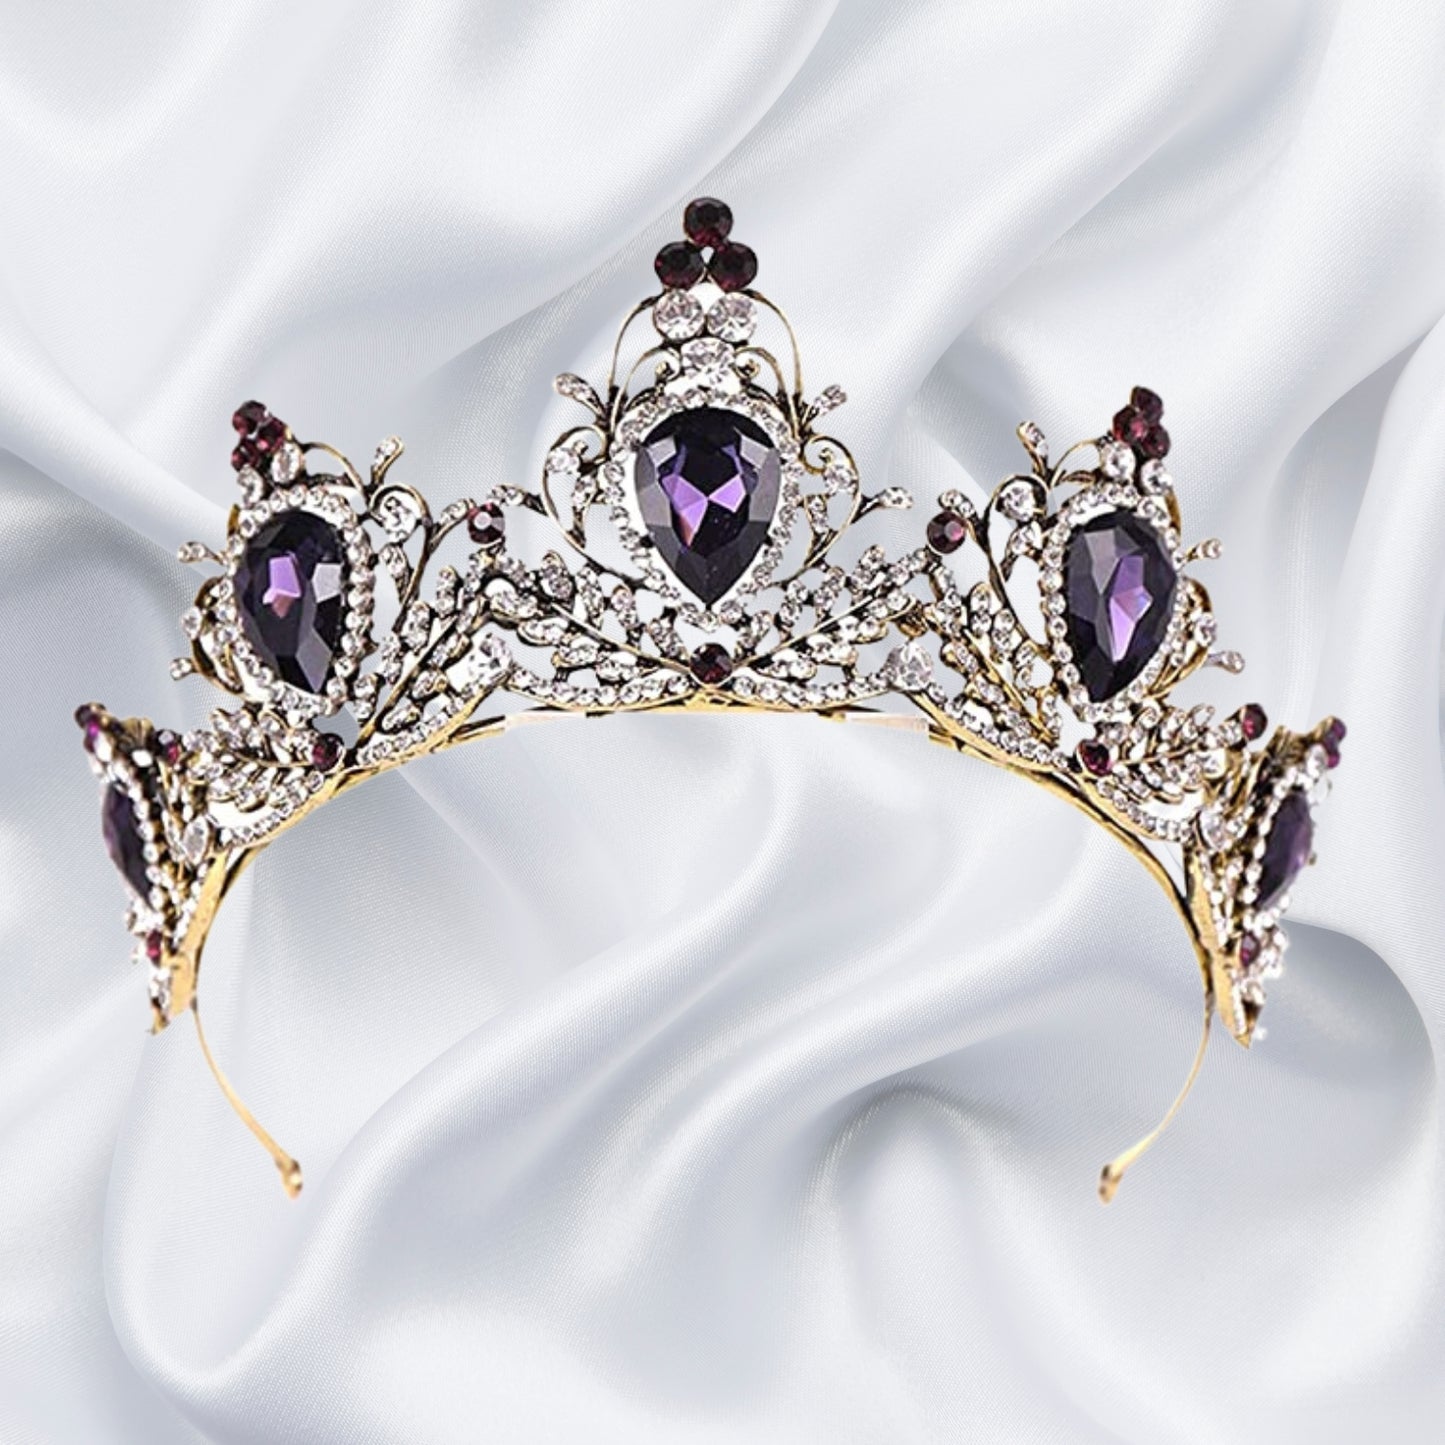 Baroque Wedding Crowns Purple Rhinestone Bridal Crown and Tiara Crystal Queen Crown Halloween Costume Party Hair Accessories for Women and Girls